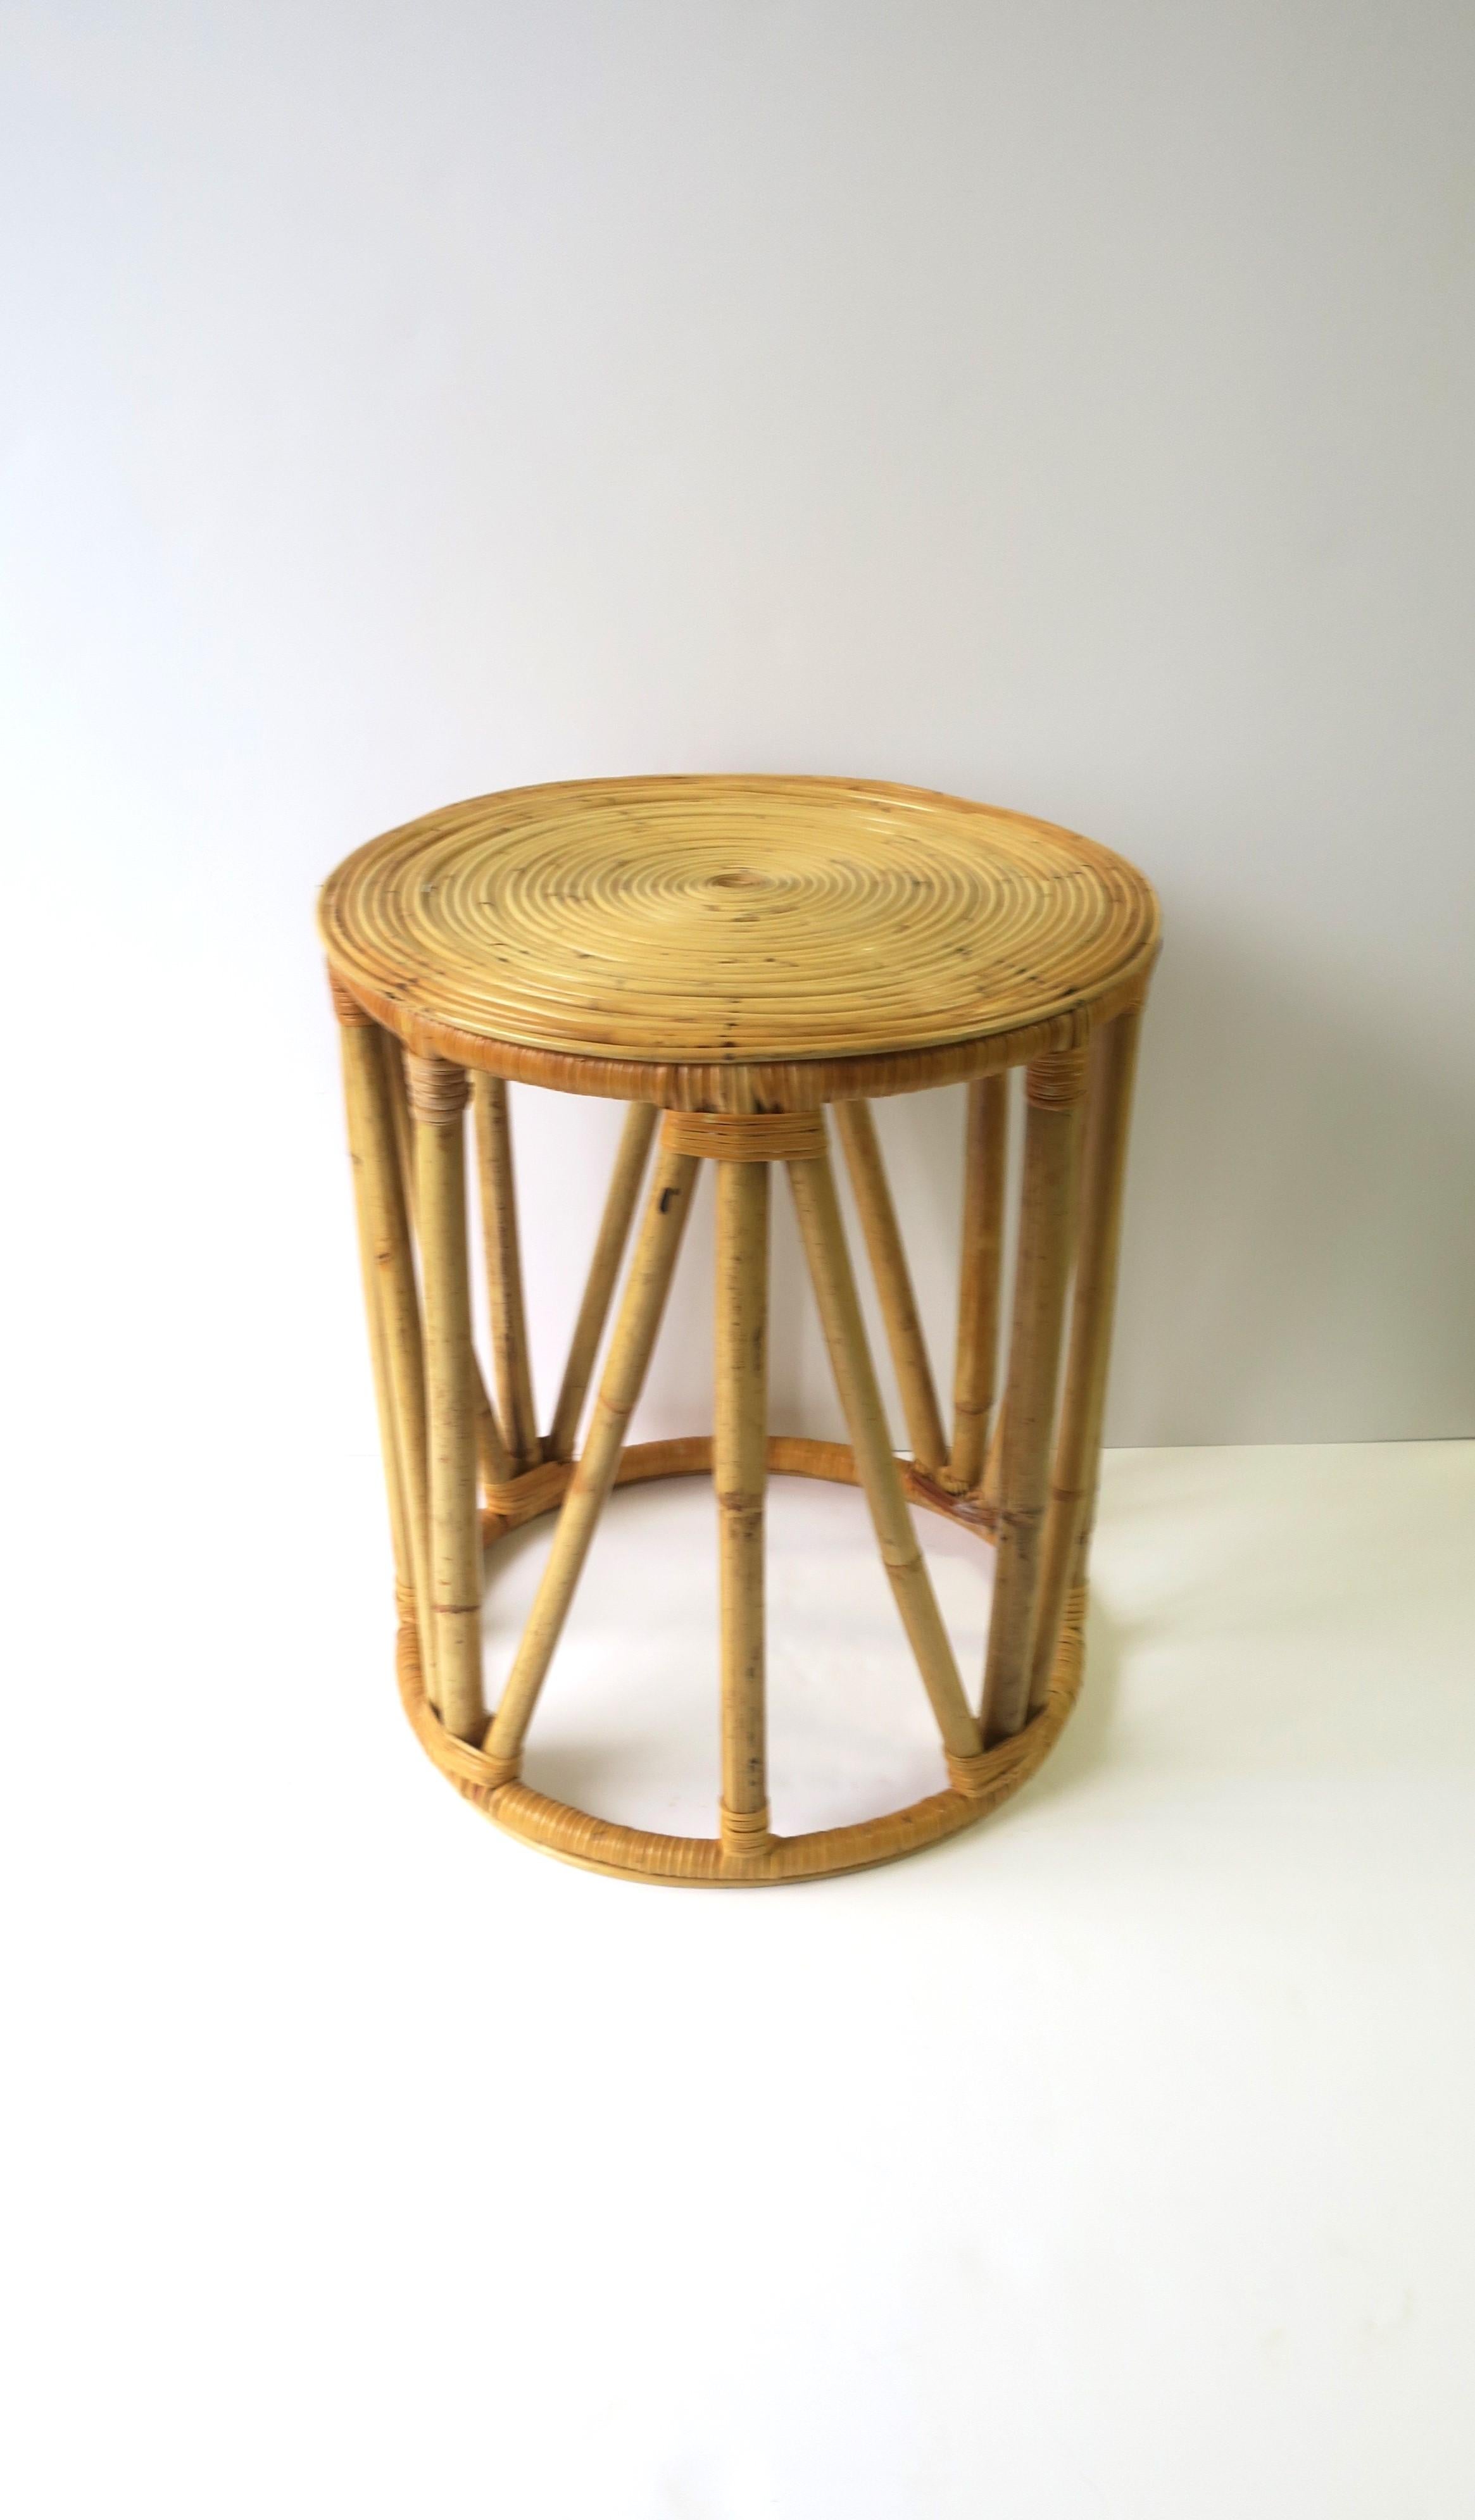 A blonde wicker bamboo side/drinks pedestal table or stool, circa mid-20th century, 1960s. Piece is blonde with coiled top and wrapped wicker bamboo base. Great as a seat/stool, to hold/display books and decorative objects, or to hold